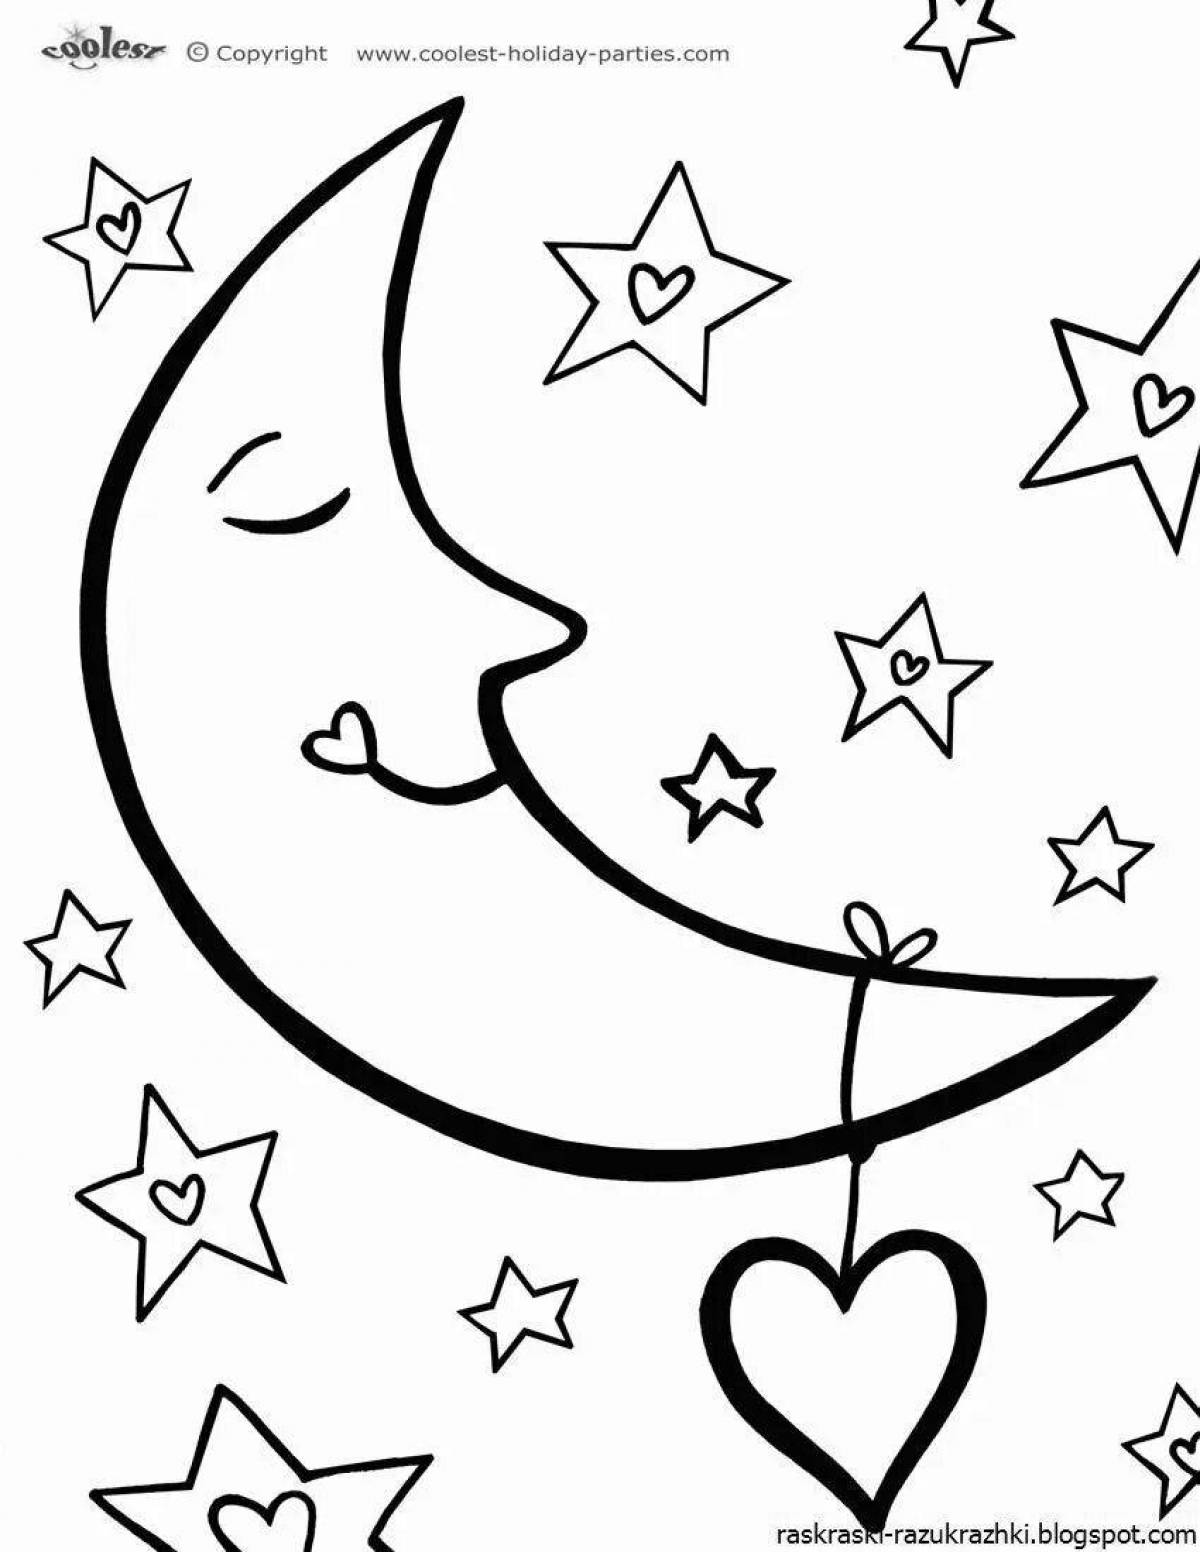 A striking crescent moon coloring page